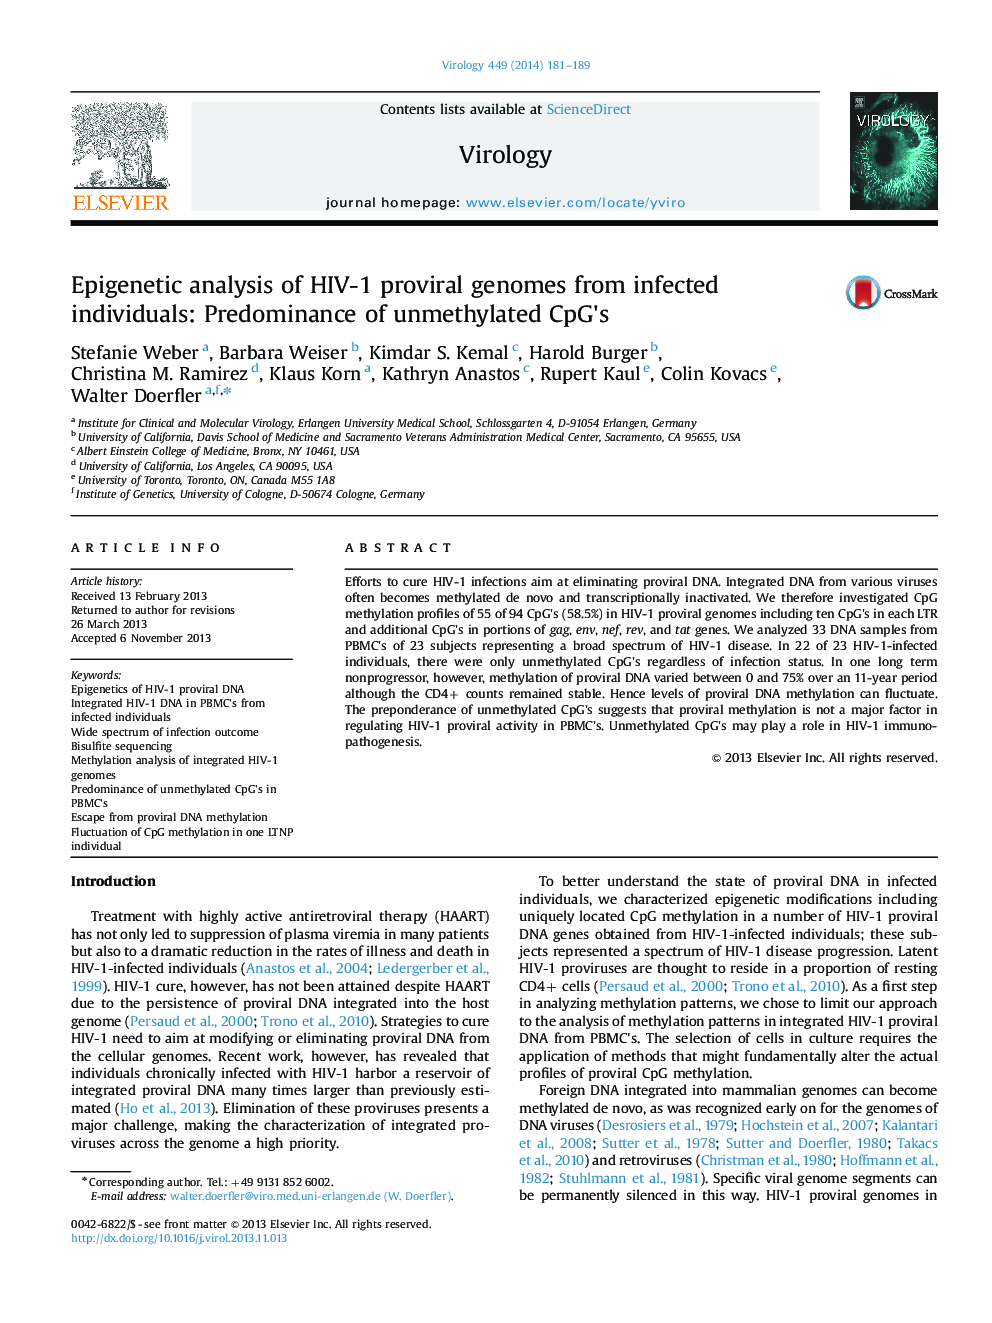 Epigenetic analysis of HIV-1 proviral genomes from infected individuals: Predominance of unmethylated CpG's